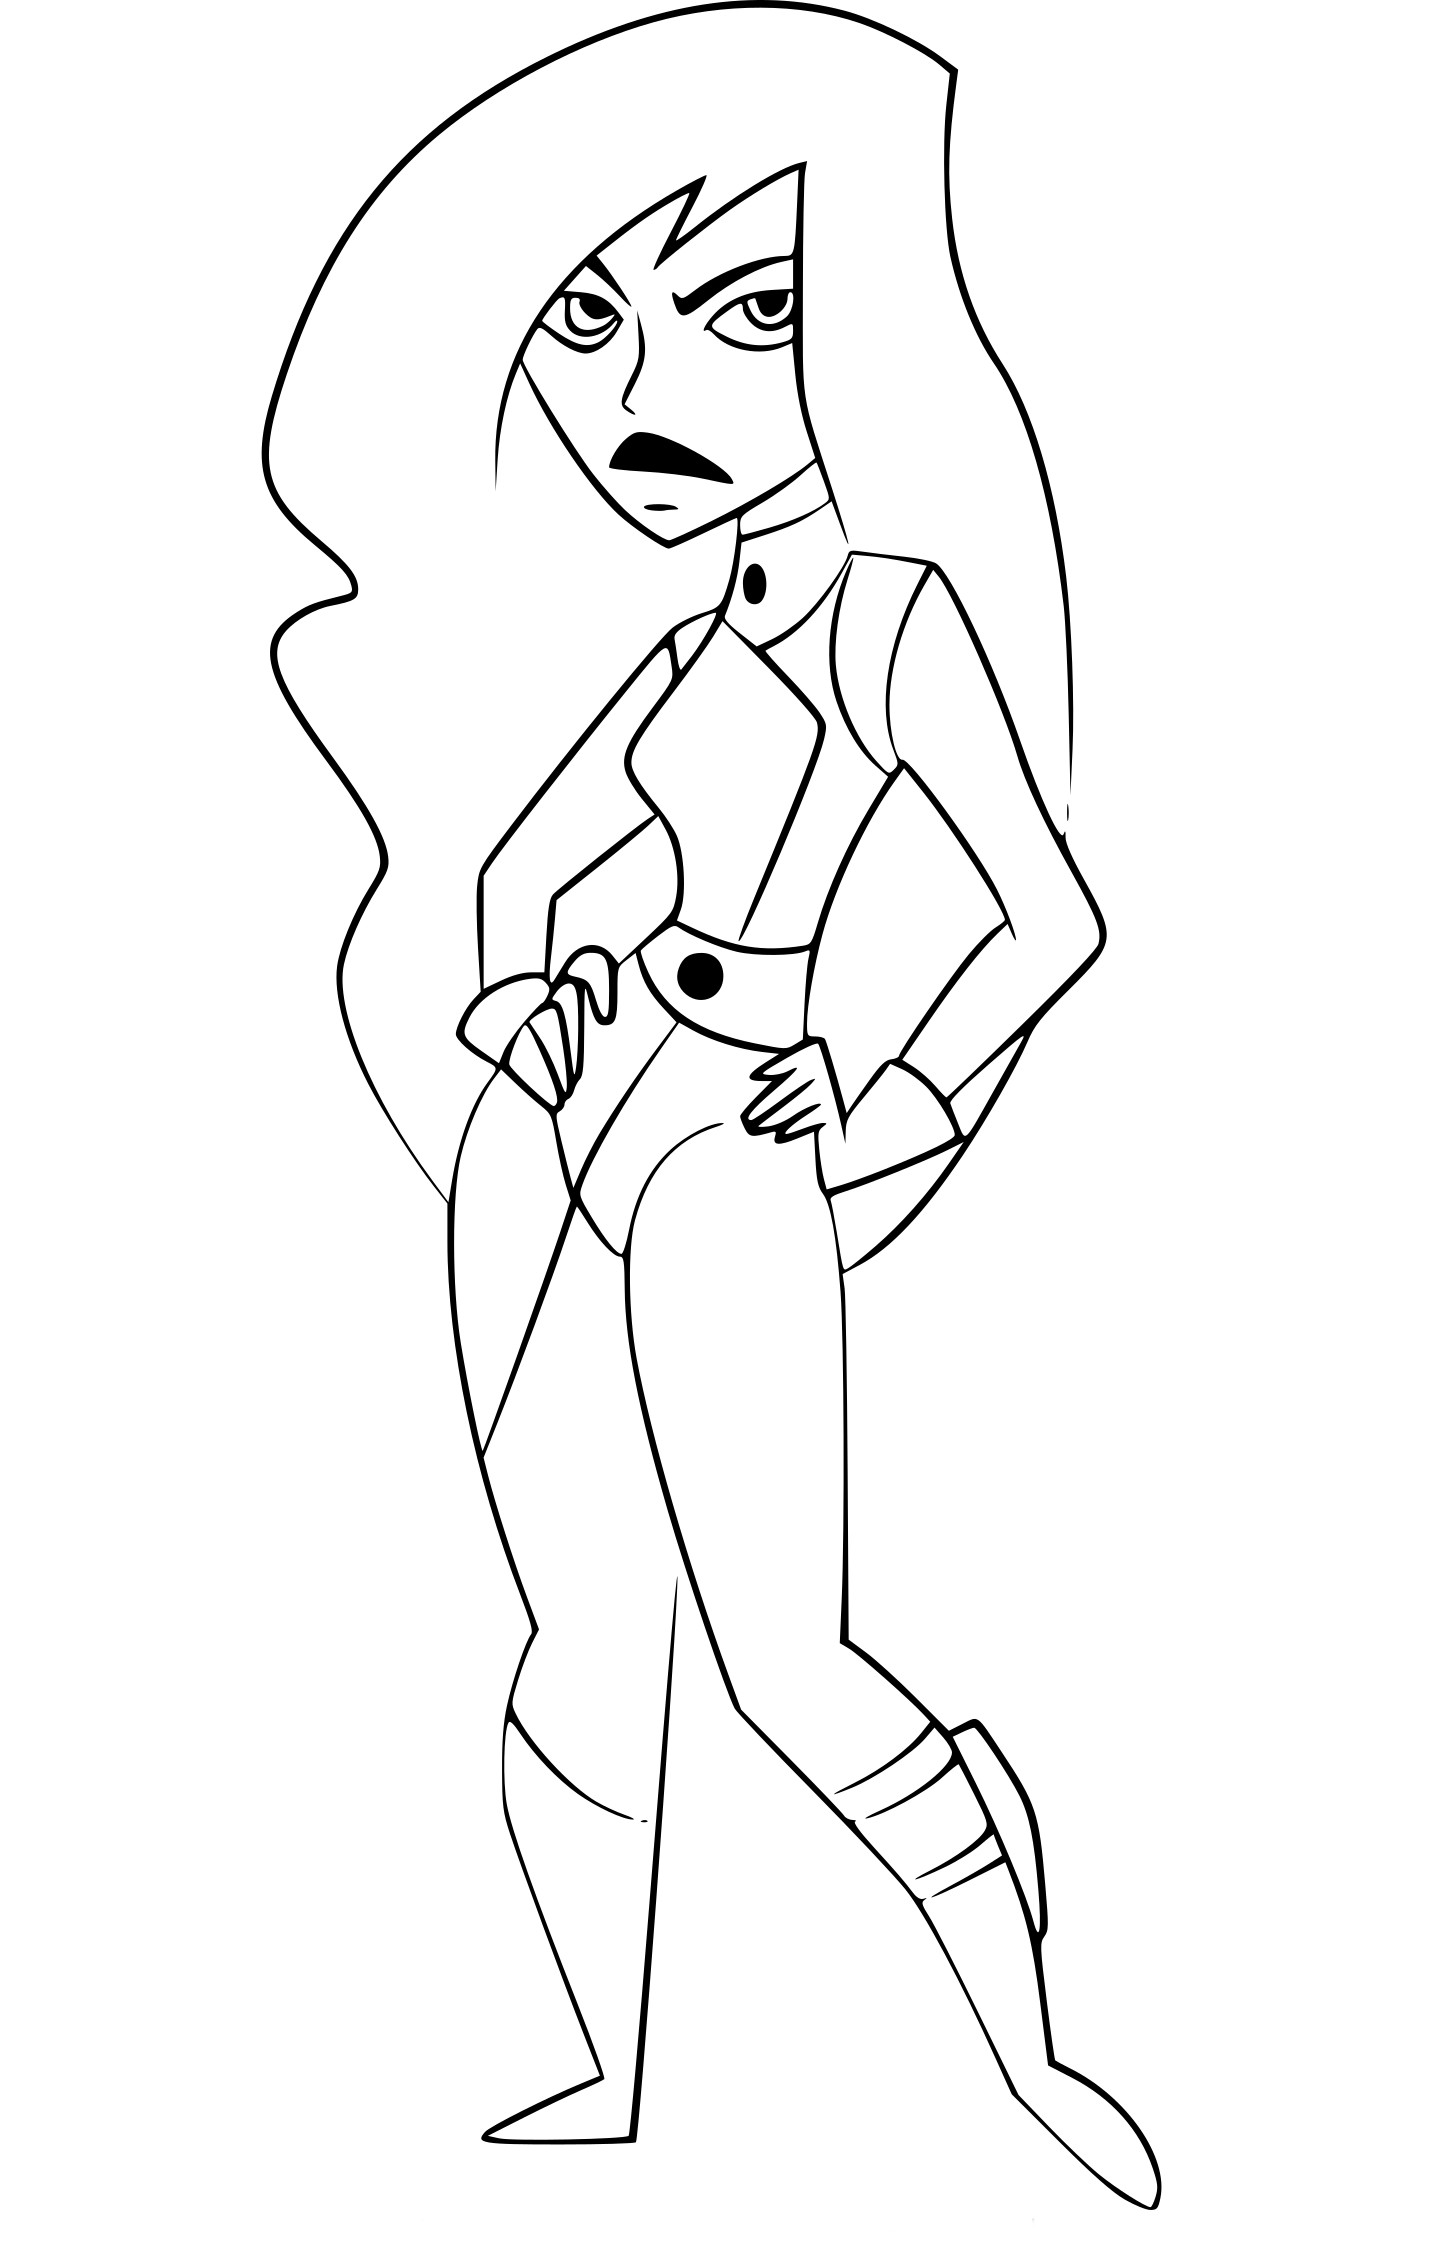 Kim Possible Shego Coloring Page